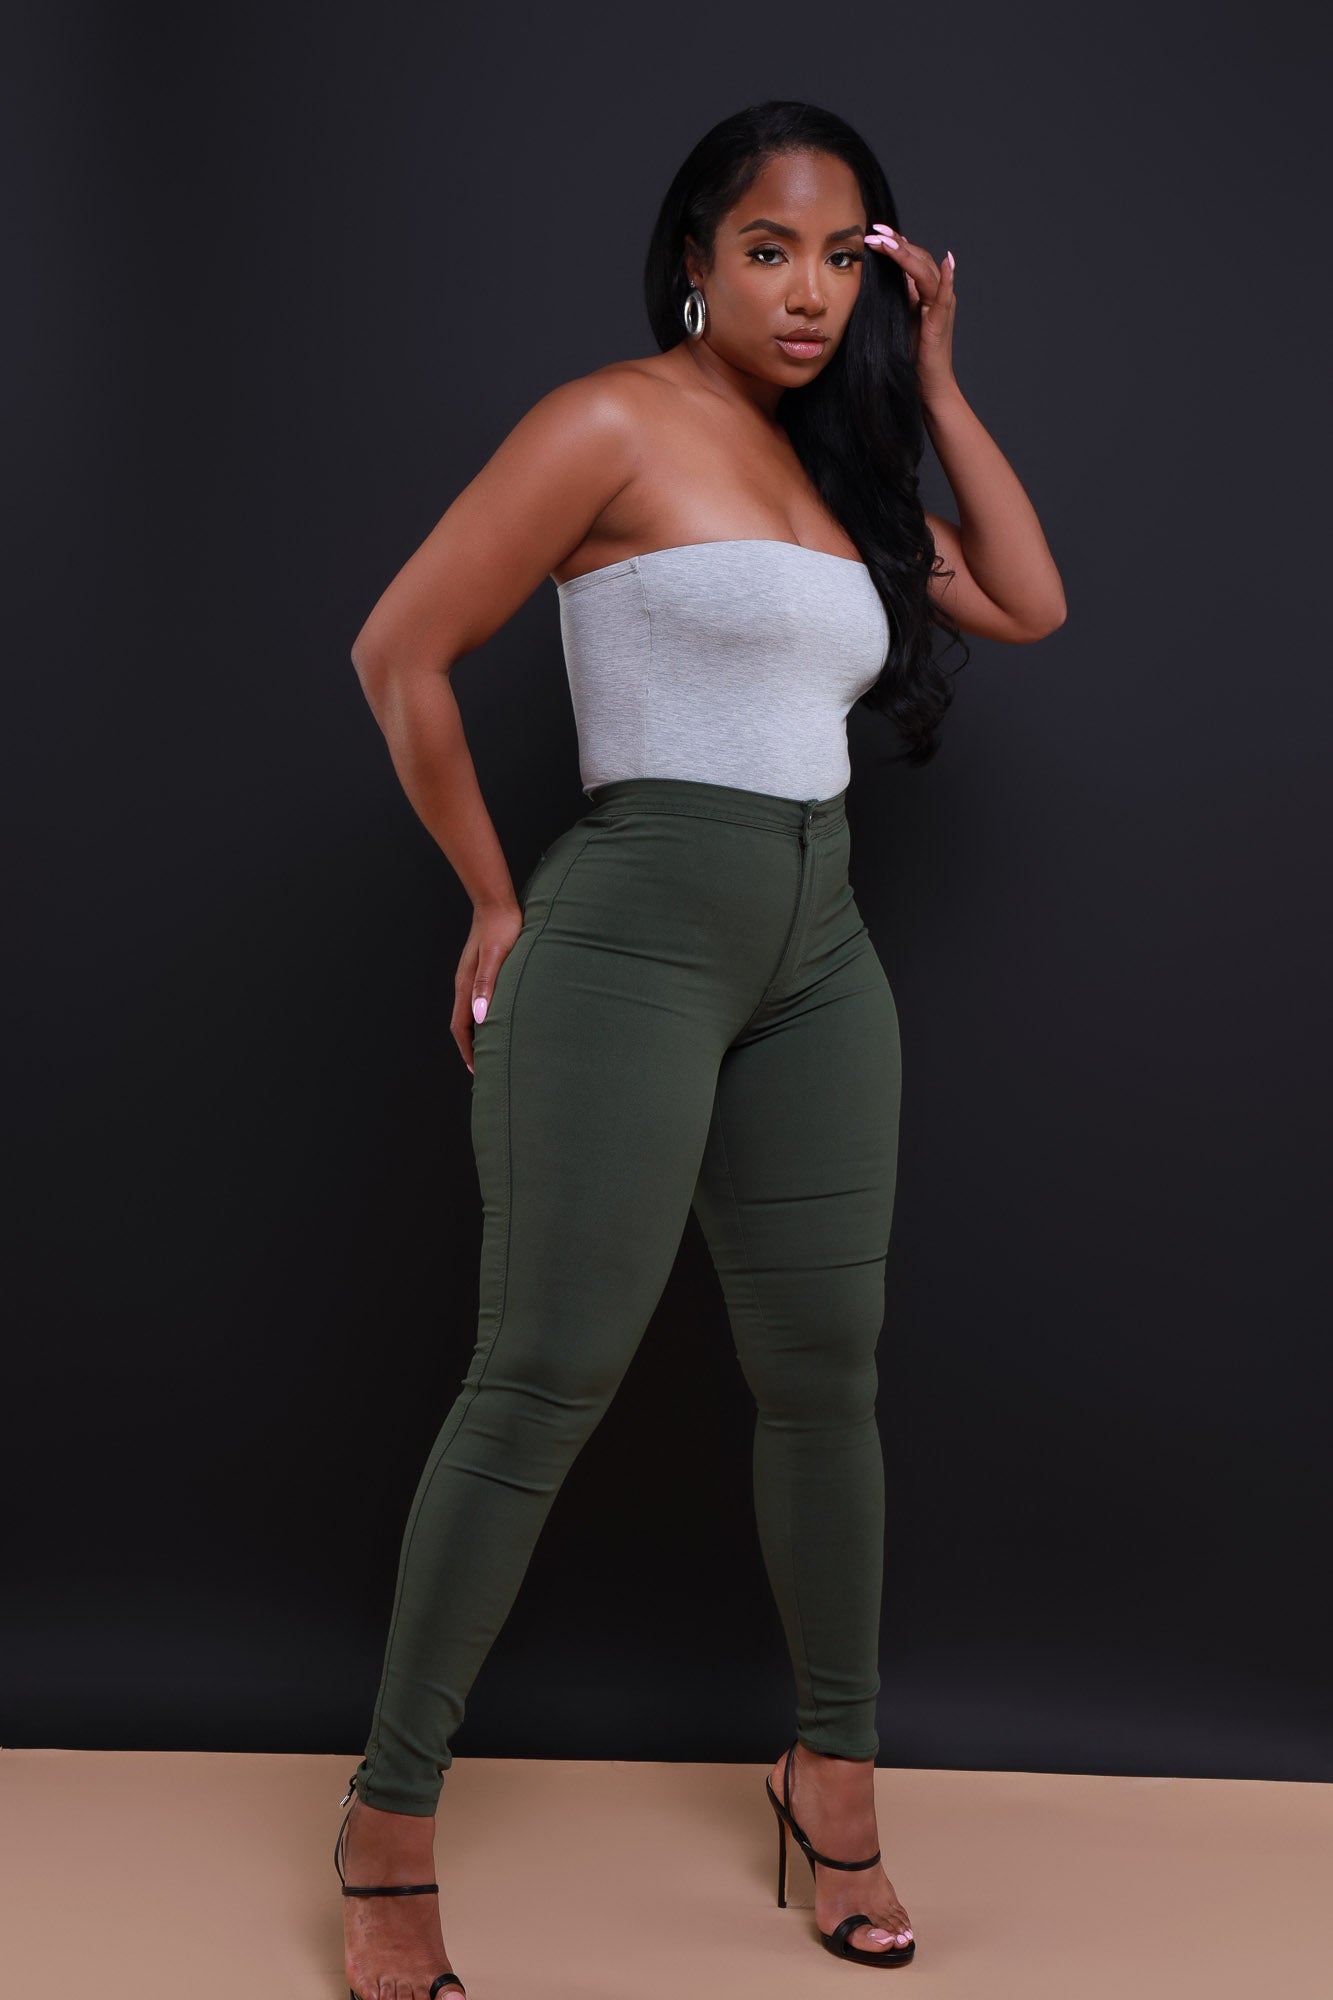 Super Swank High Waist Stretchy Jeans - Olive